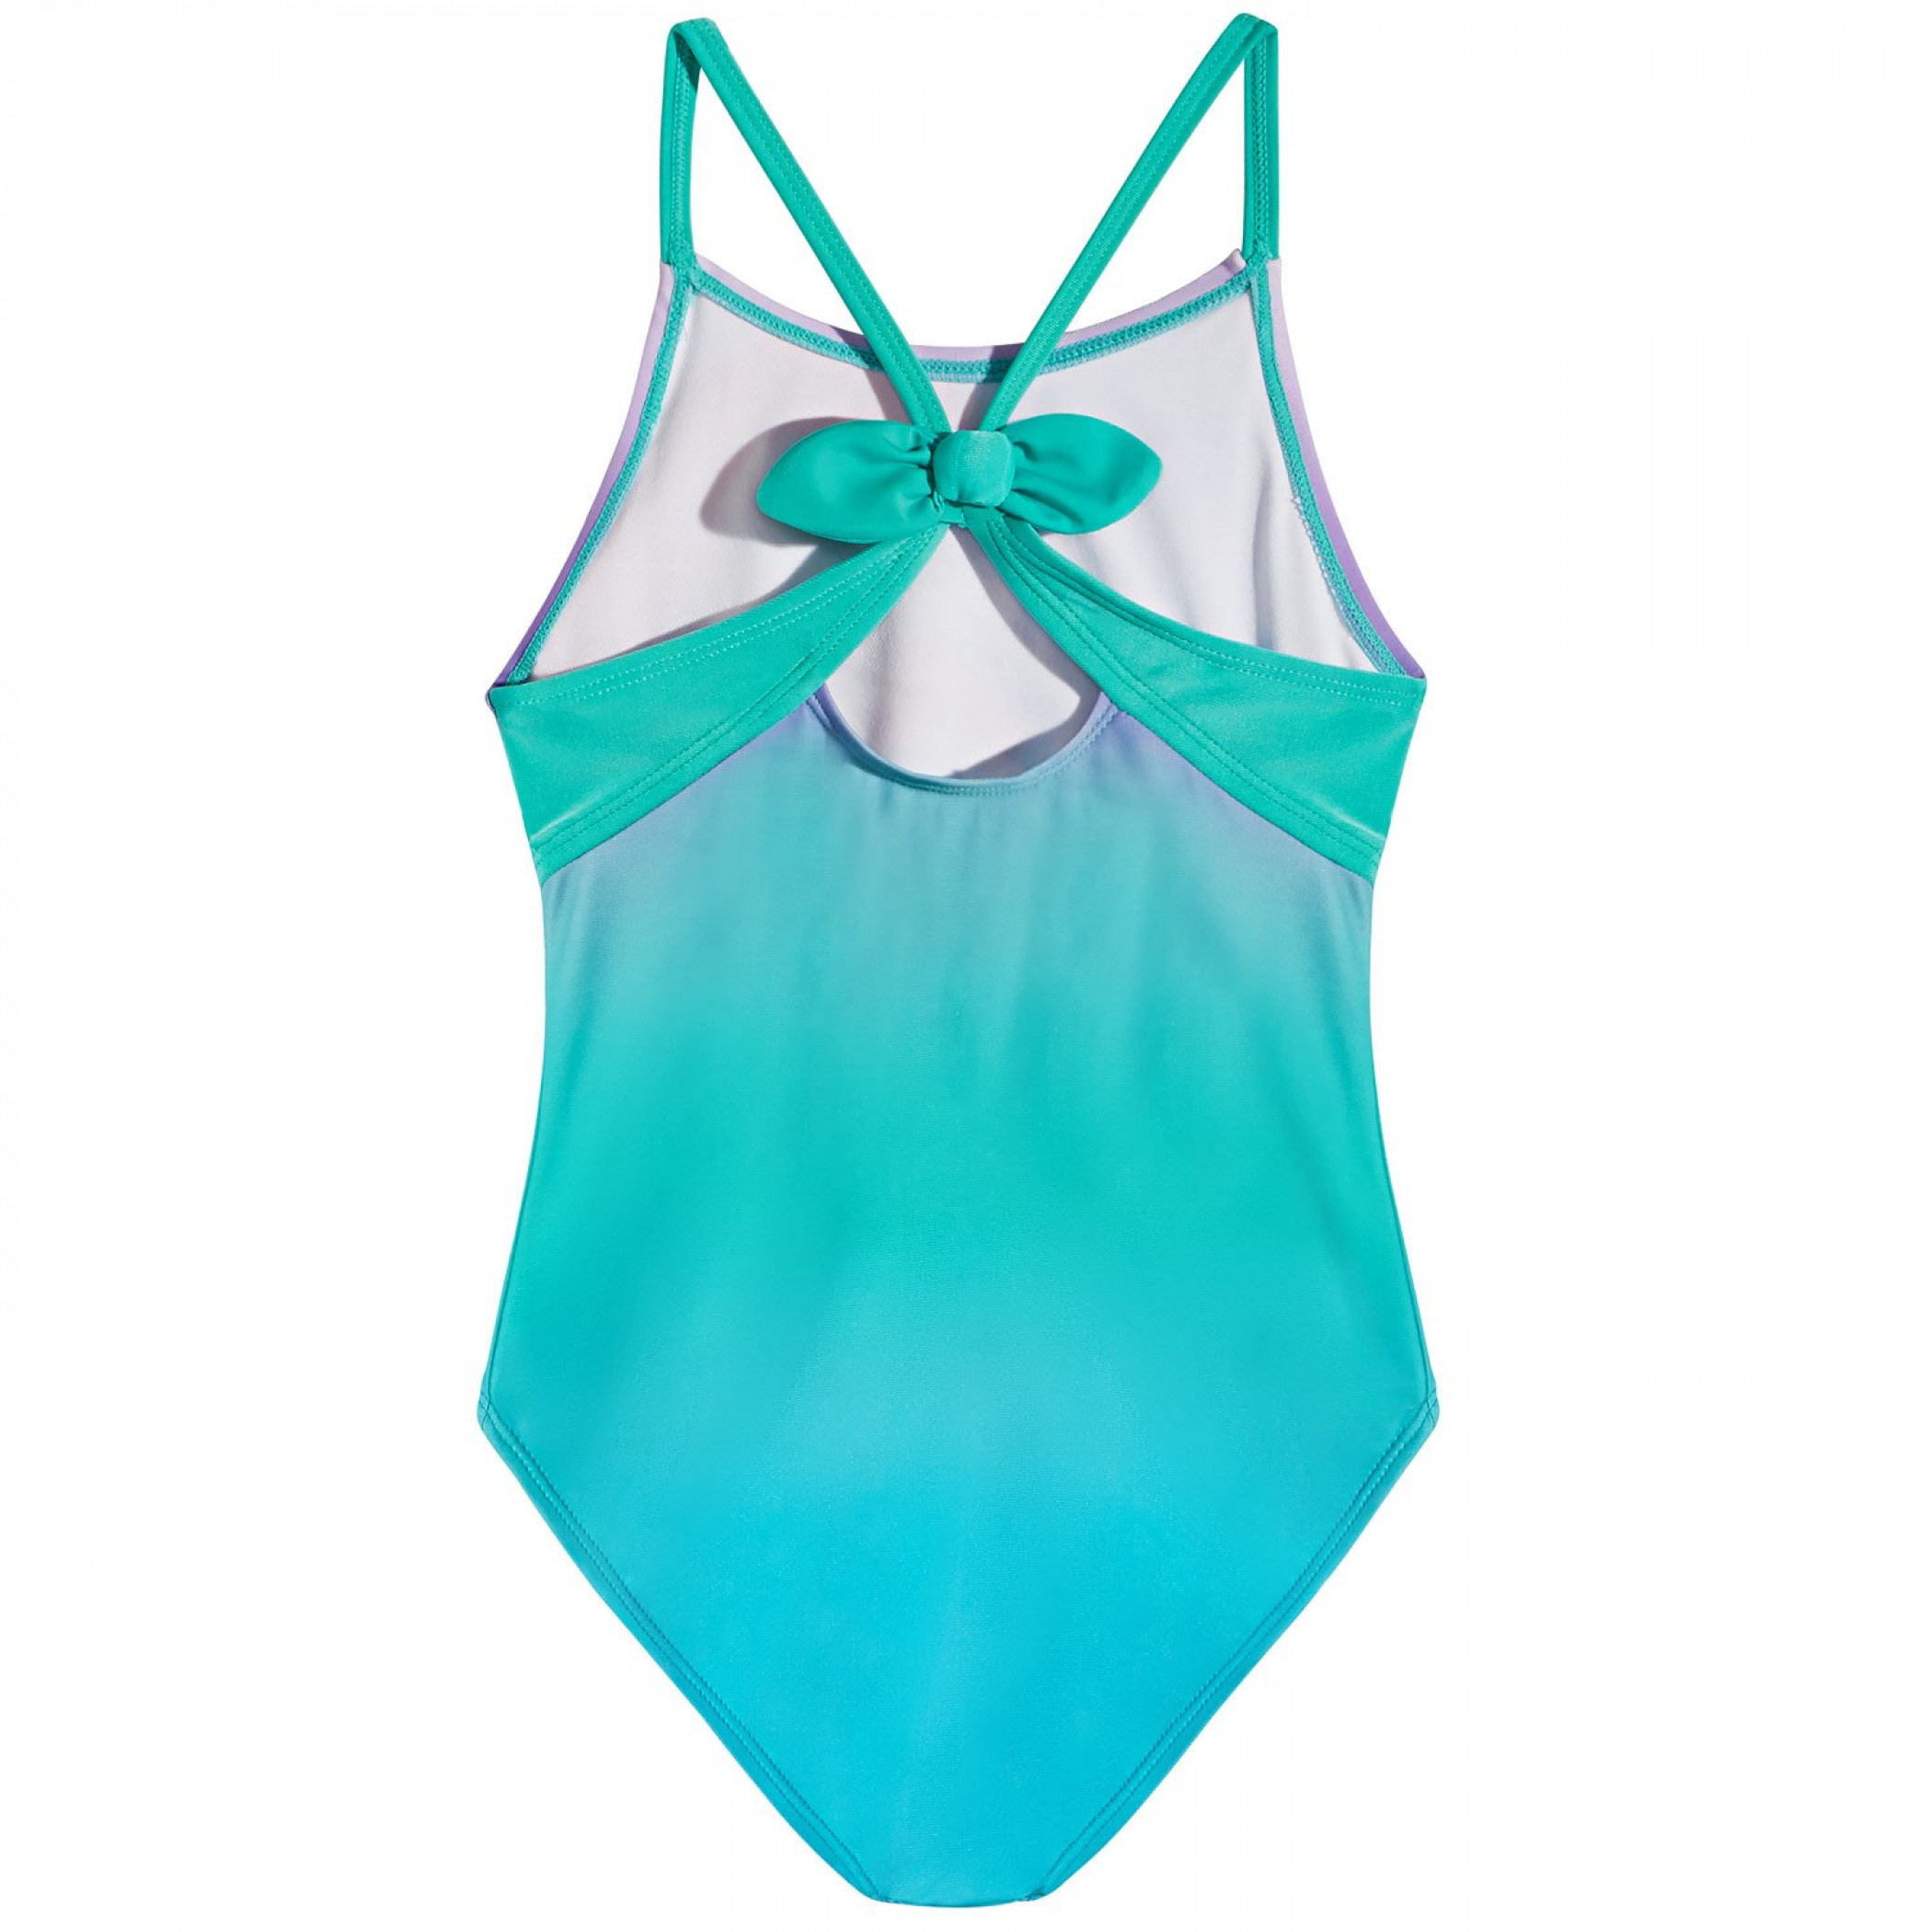 The Little Mermaid Ariel One Piece Swimsuit with Color Changing Scales